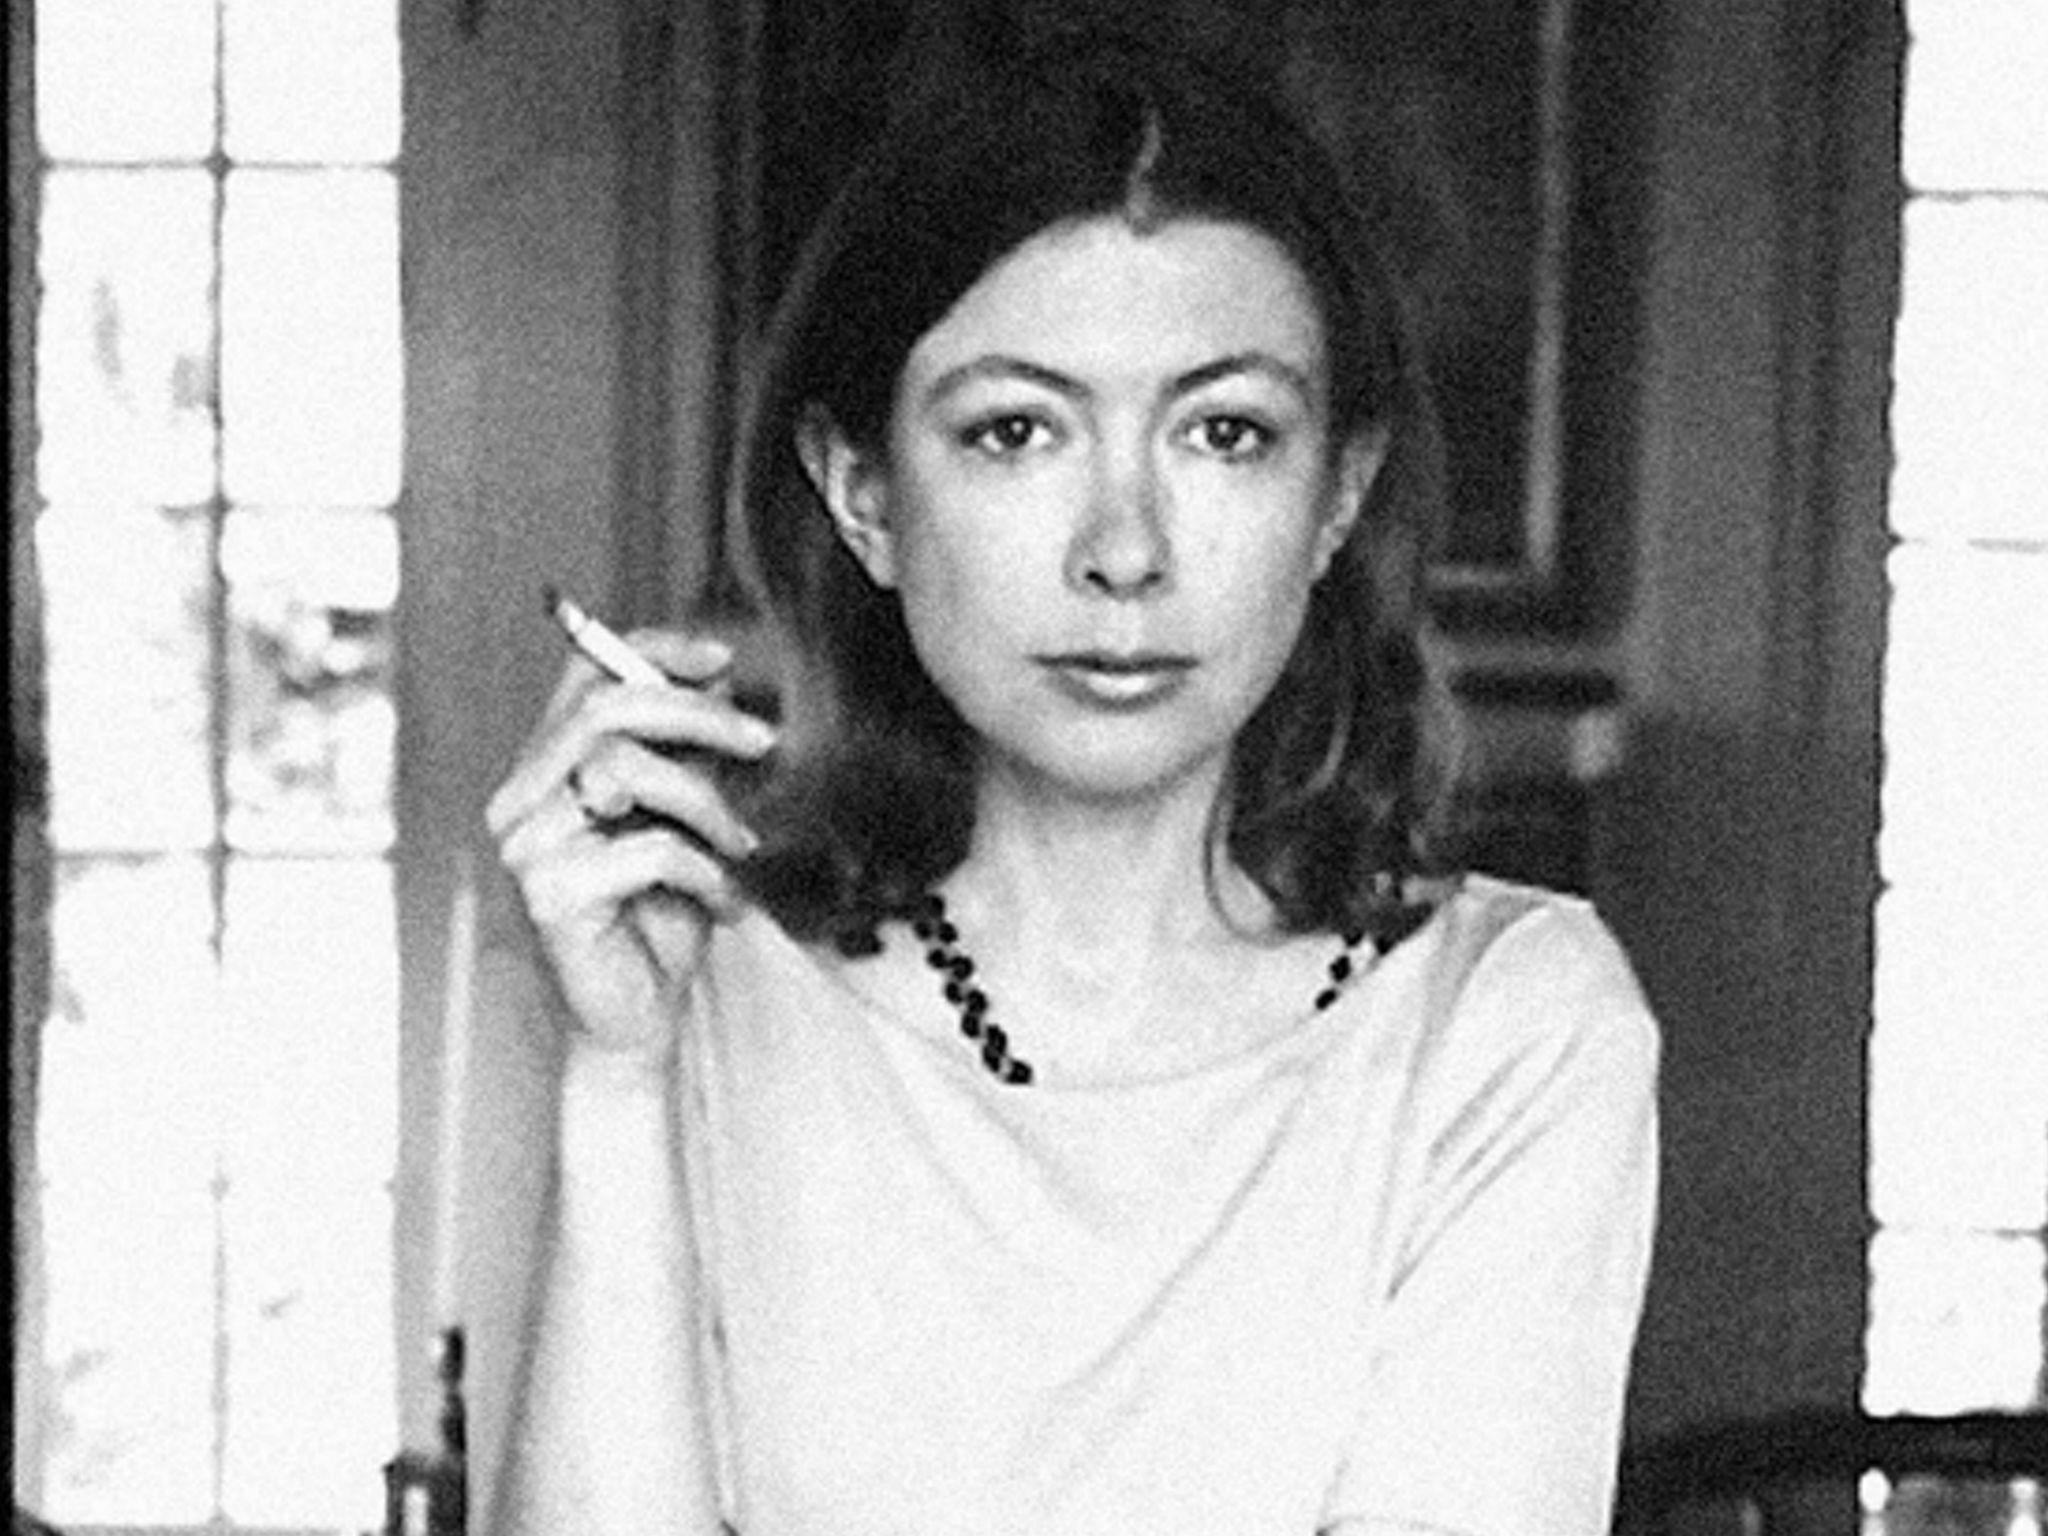 Over a half-century career, Didion has been celebrated for her journalism, essays and novels